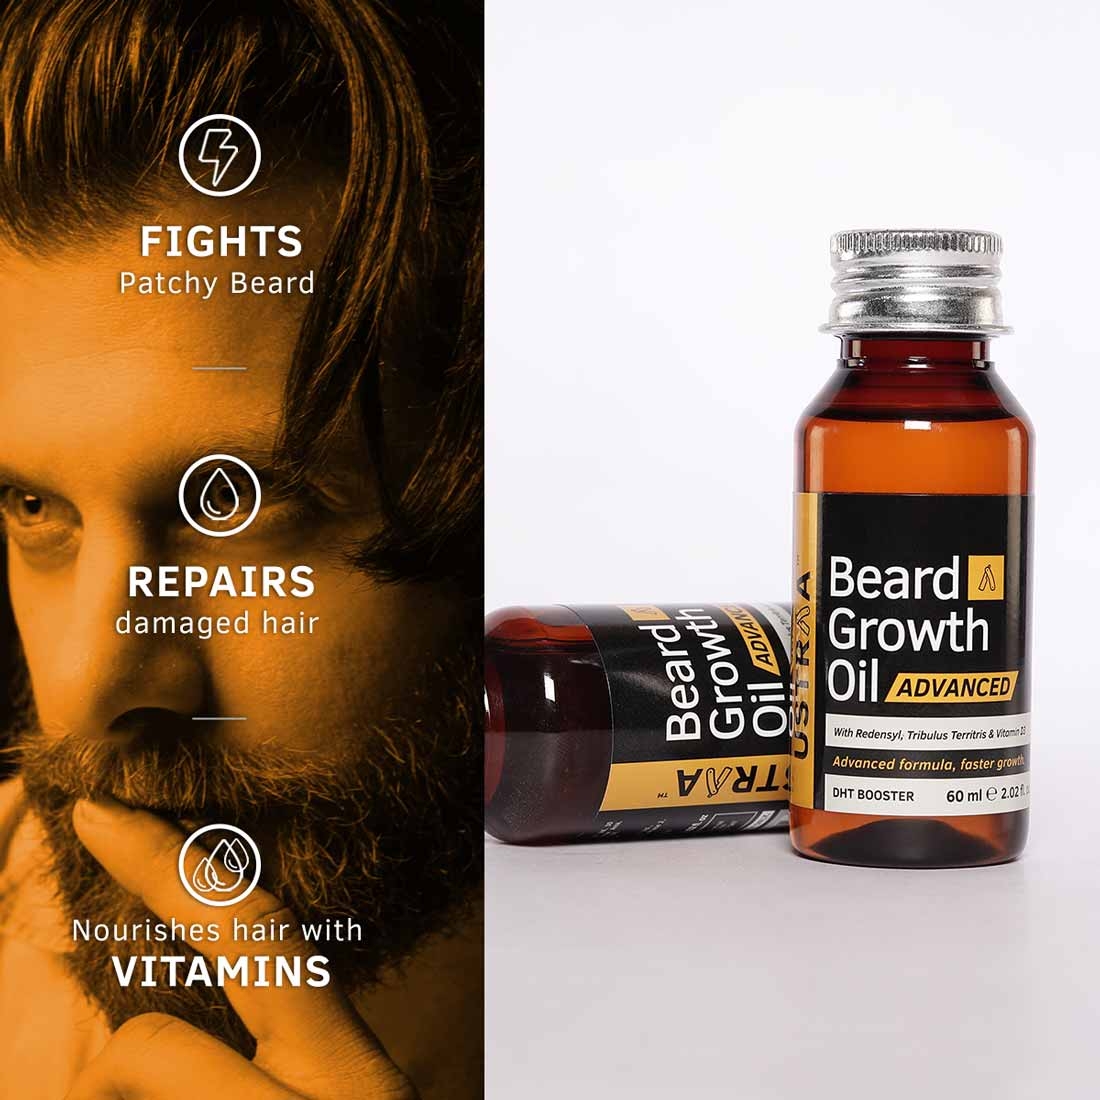 Ustraa | Beard growth Oil - Advanced (With Dht Boosters) - 60ml 1